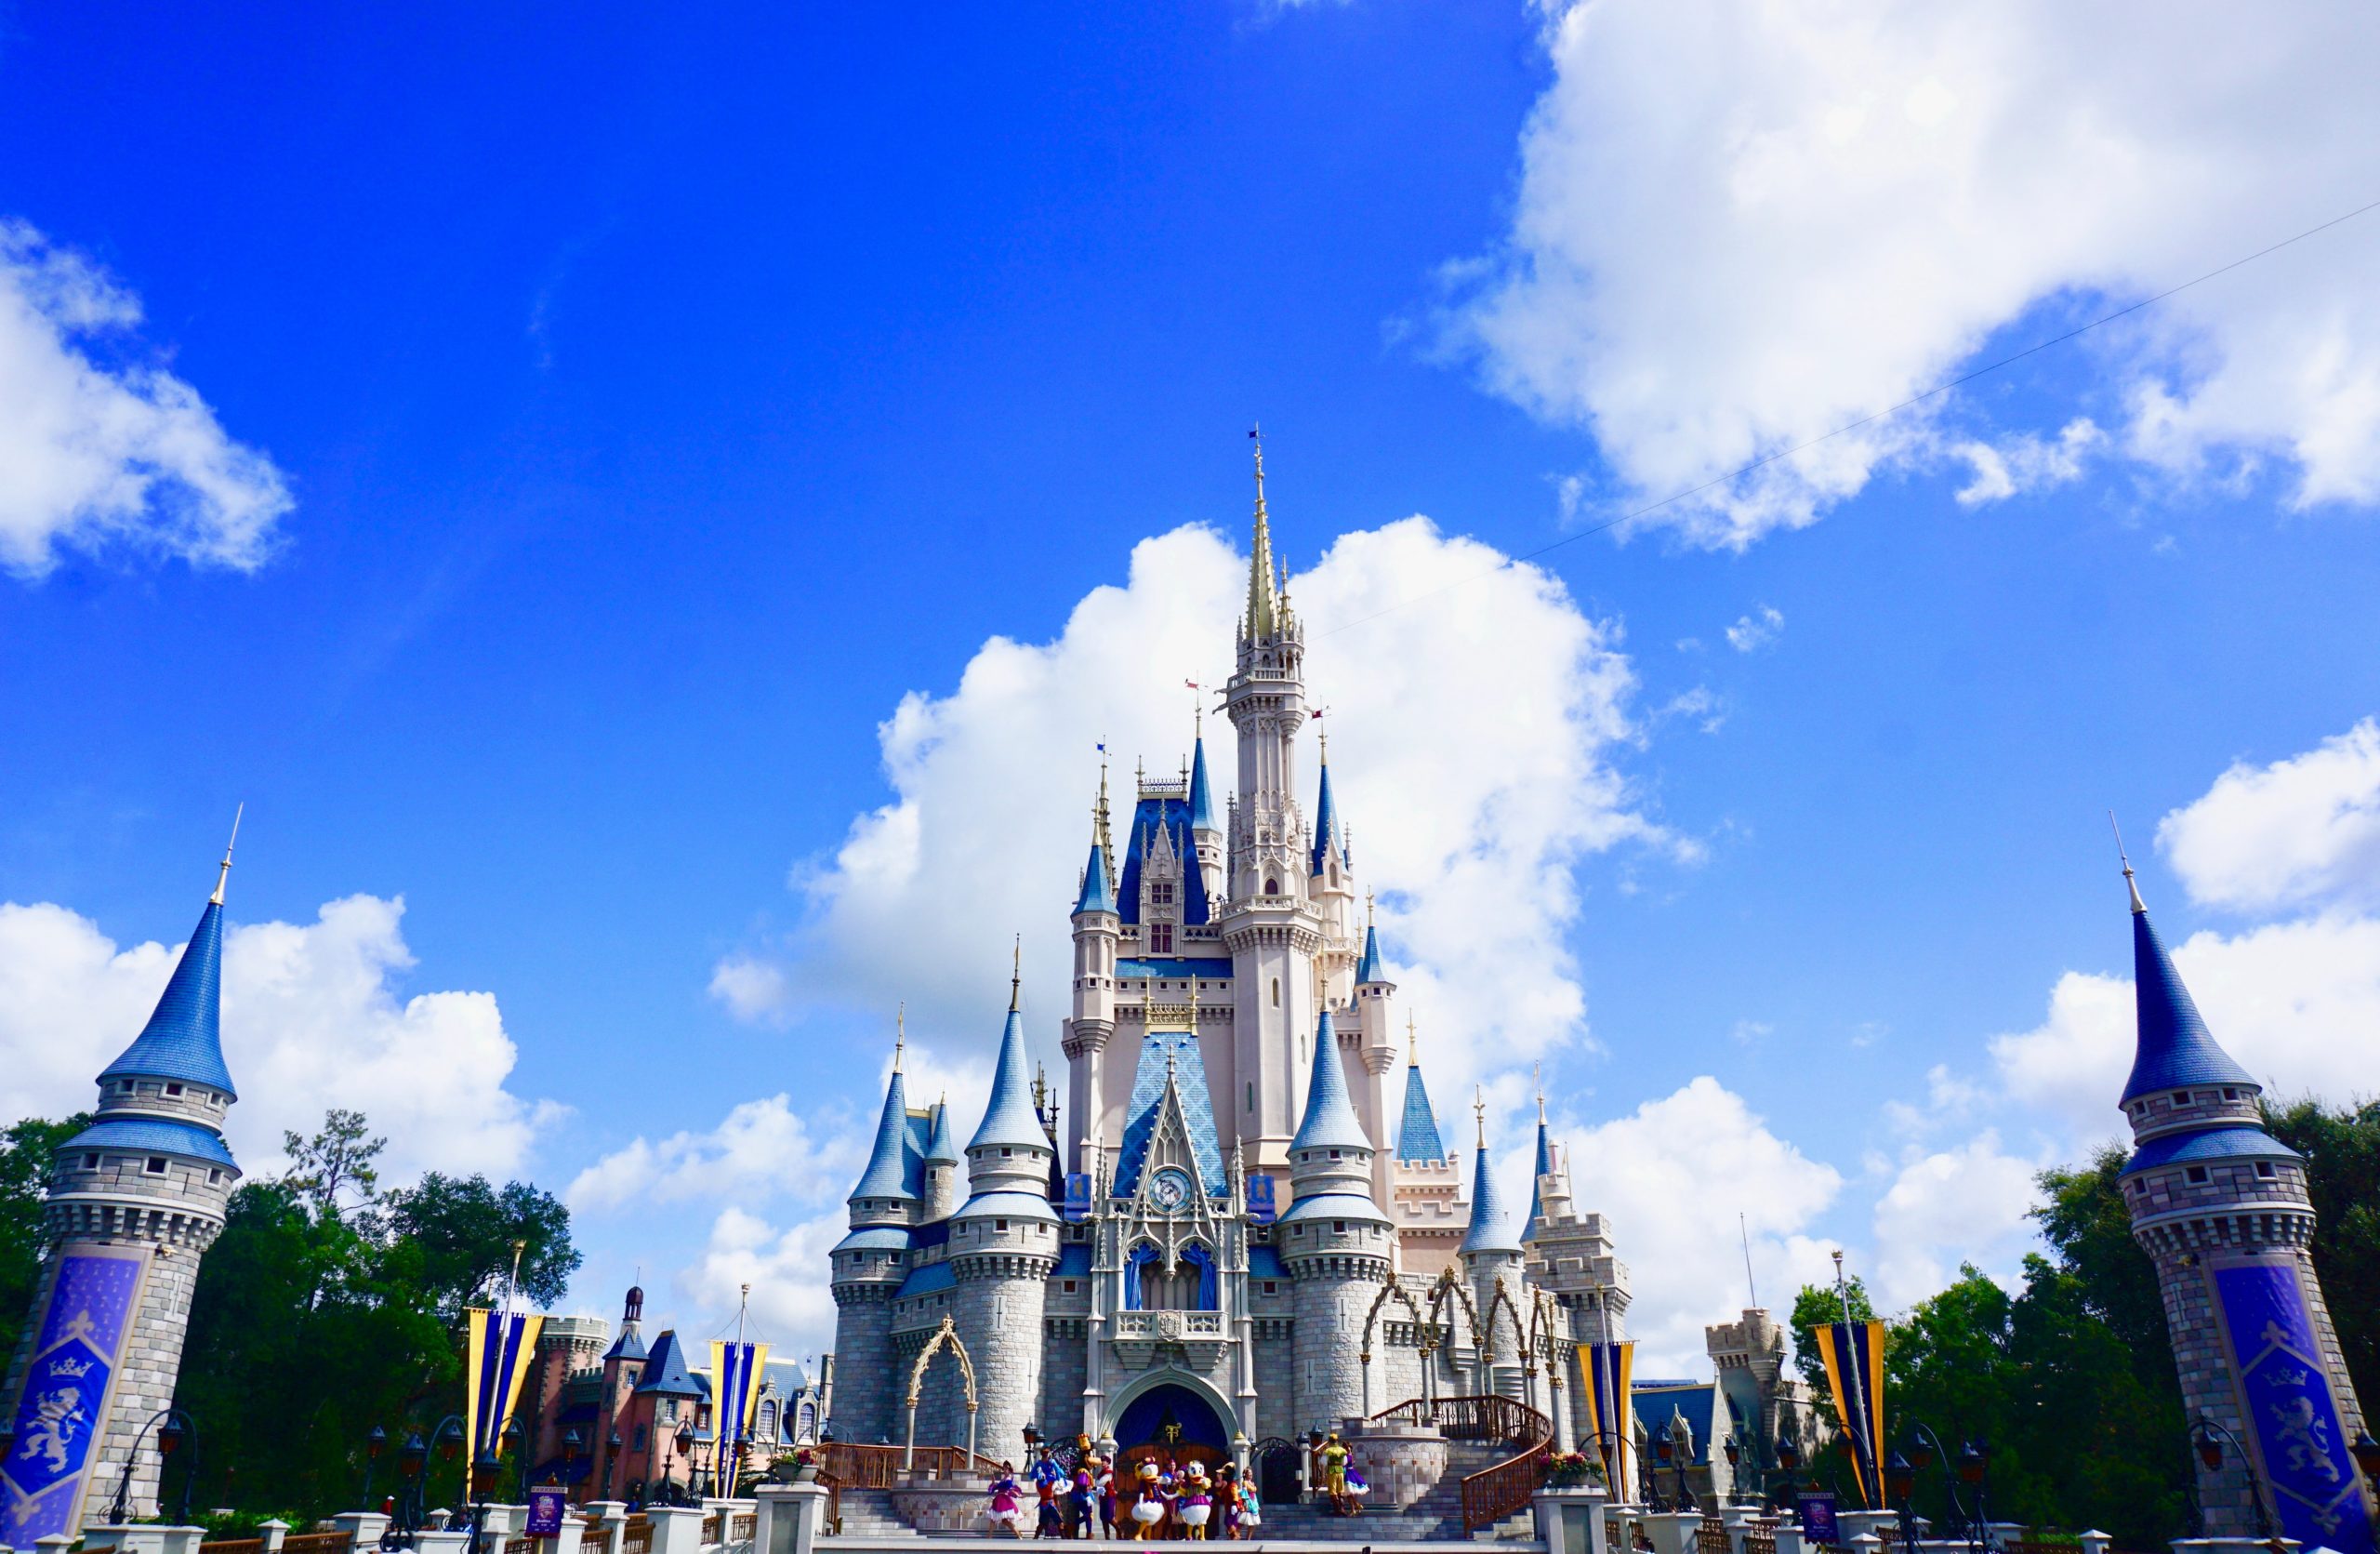 How Theme Parks Could Benefit From Location Solutions 